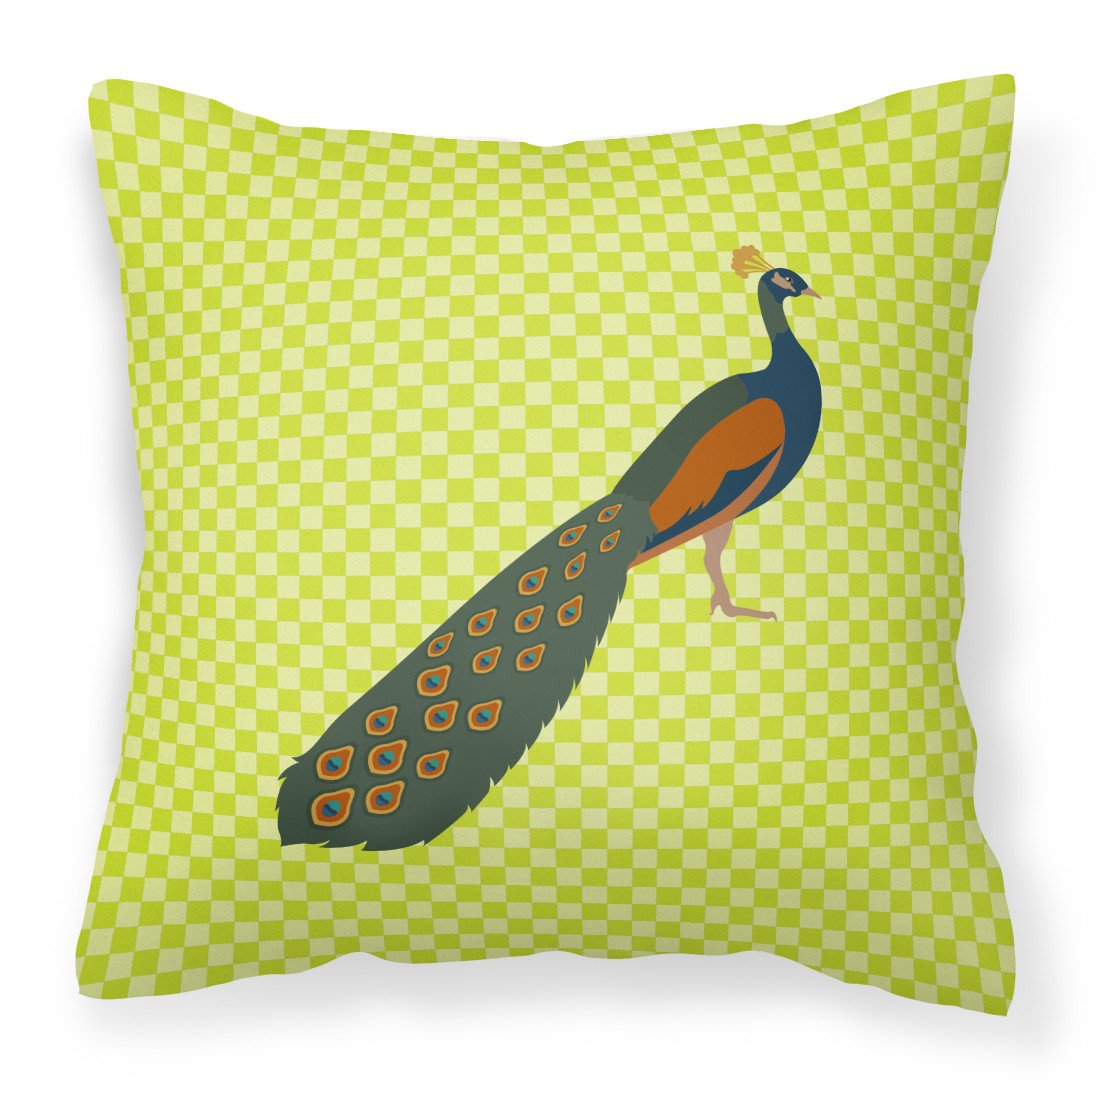 Indian Peacock Peafowl Green Fabric Decorative Pillow BB7751PW1818 by Caroline's Treasures